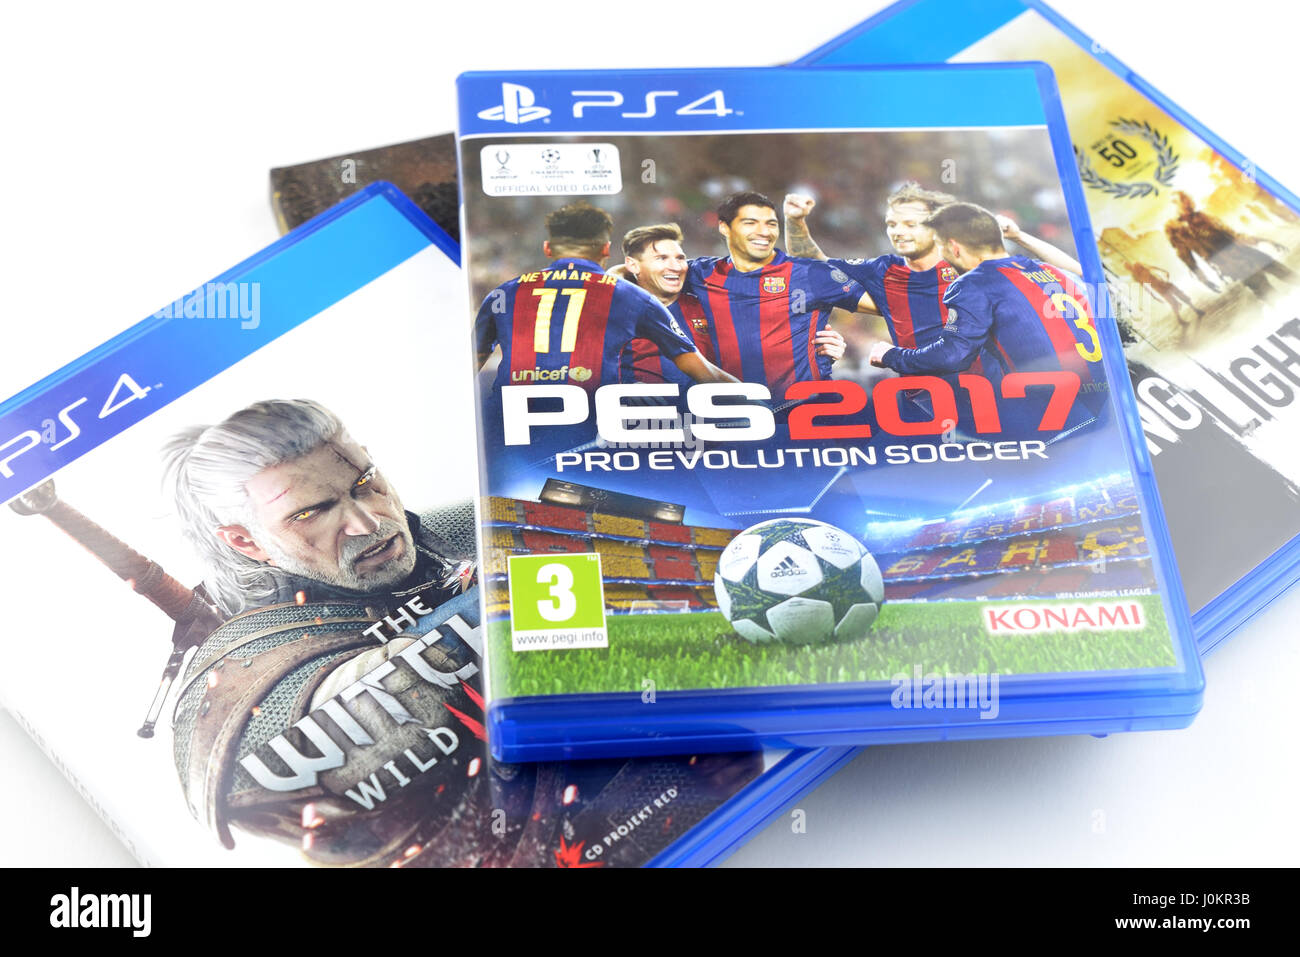 BARCELONA, SPAIN - JAN 24, 2017: A collection of video games for Playstation 4 devices, including Pro Evolution Soccer and The Witcher 3, isolated. Stock Photo